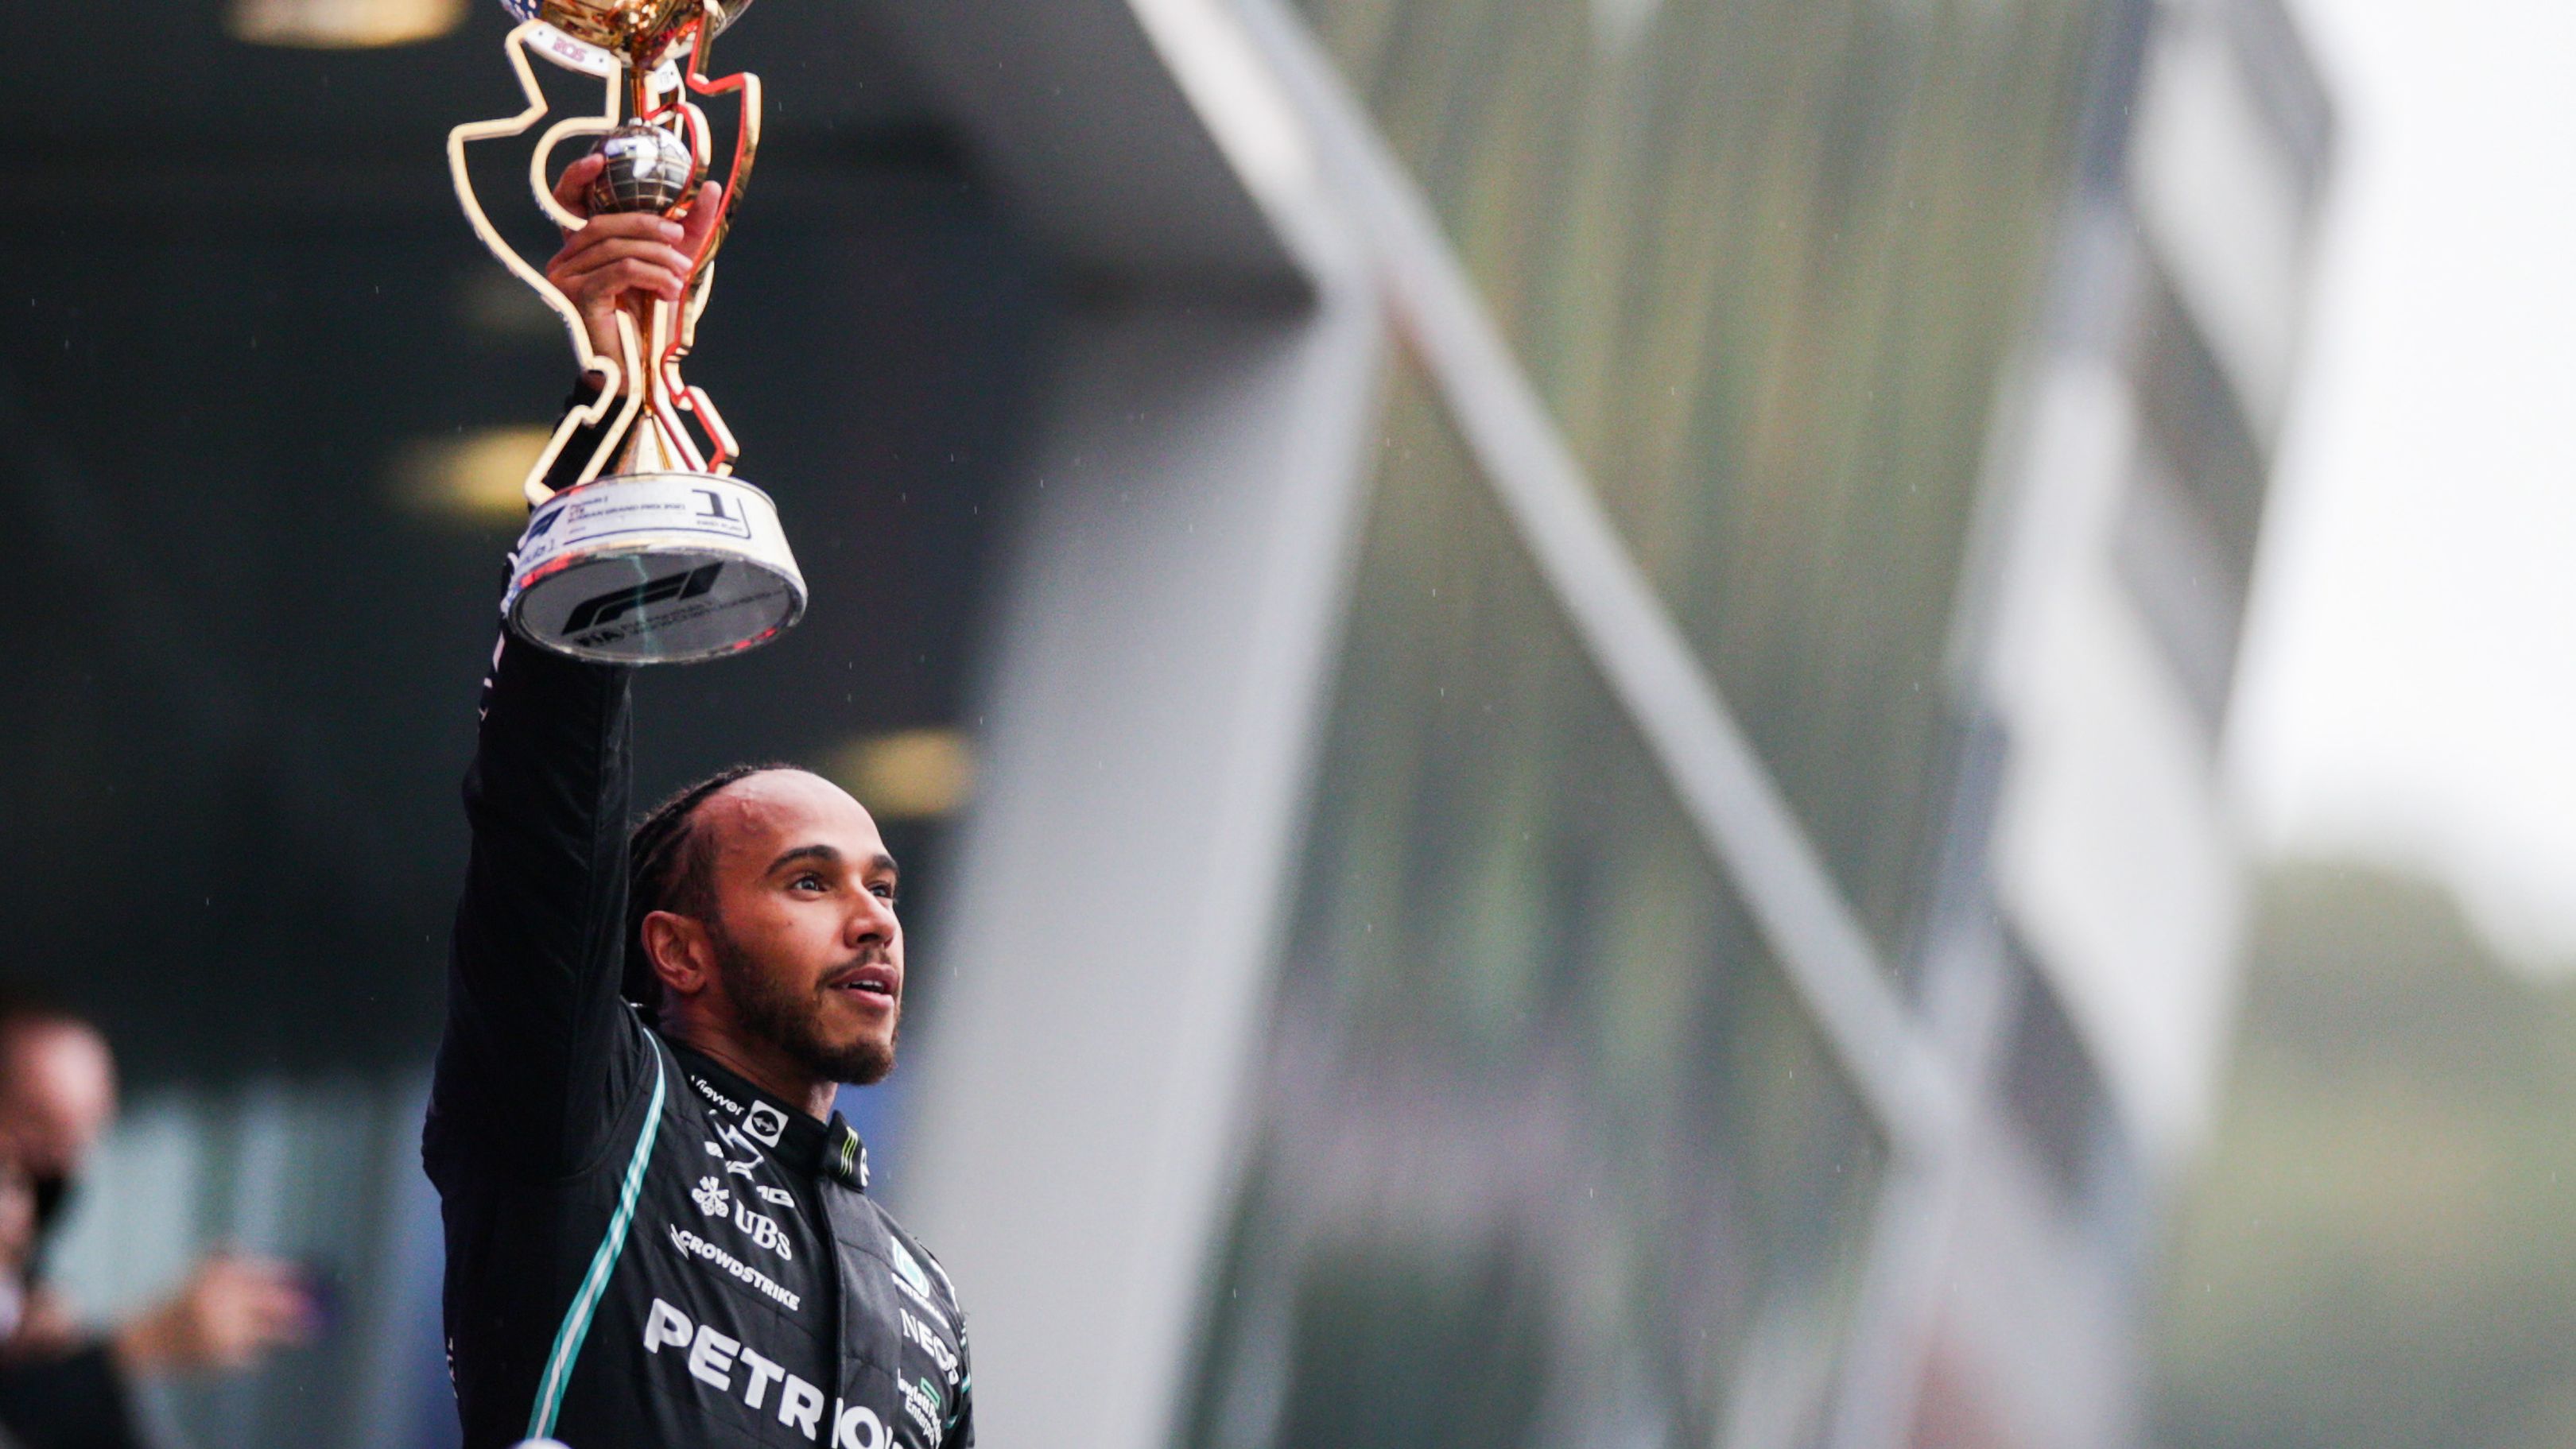 Hamilton's incredible F1 feat as rain plays havoc in Russia